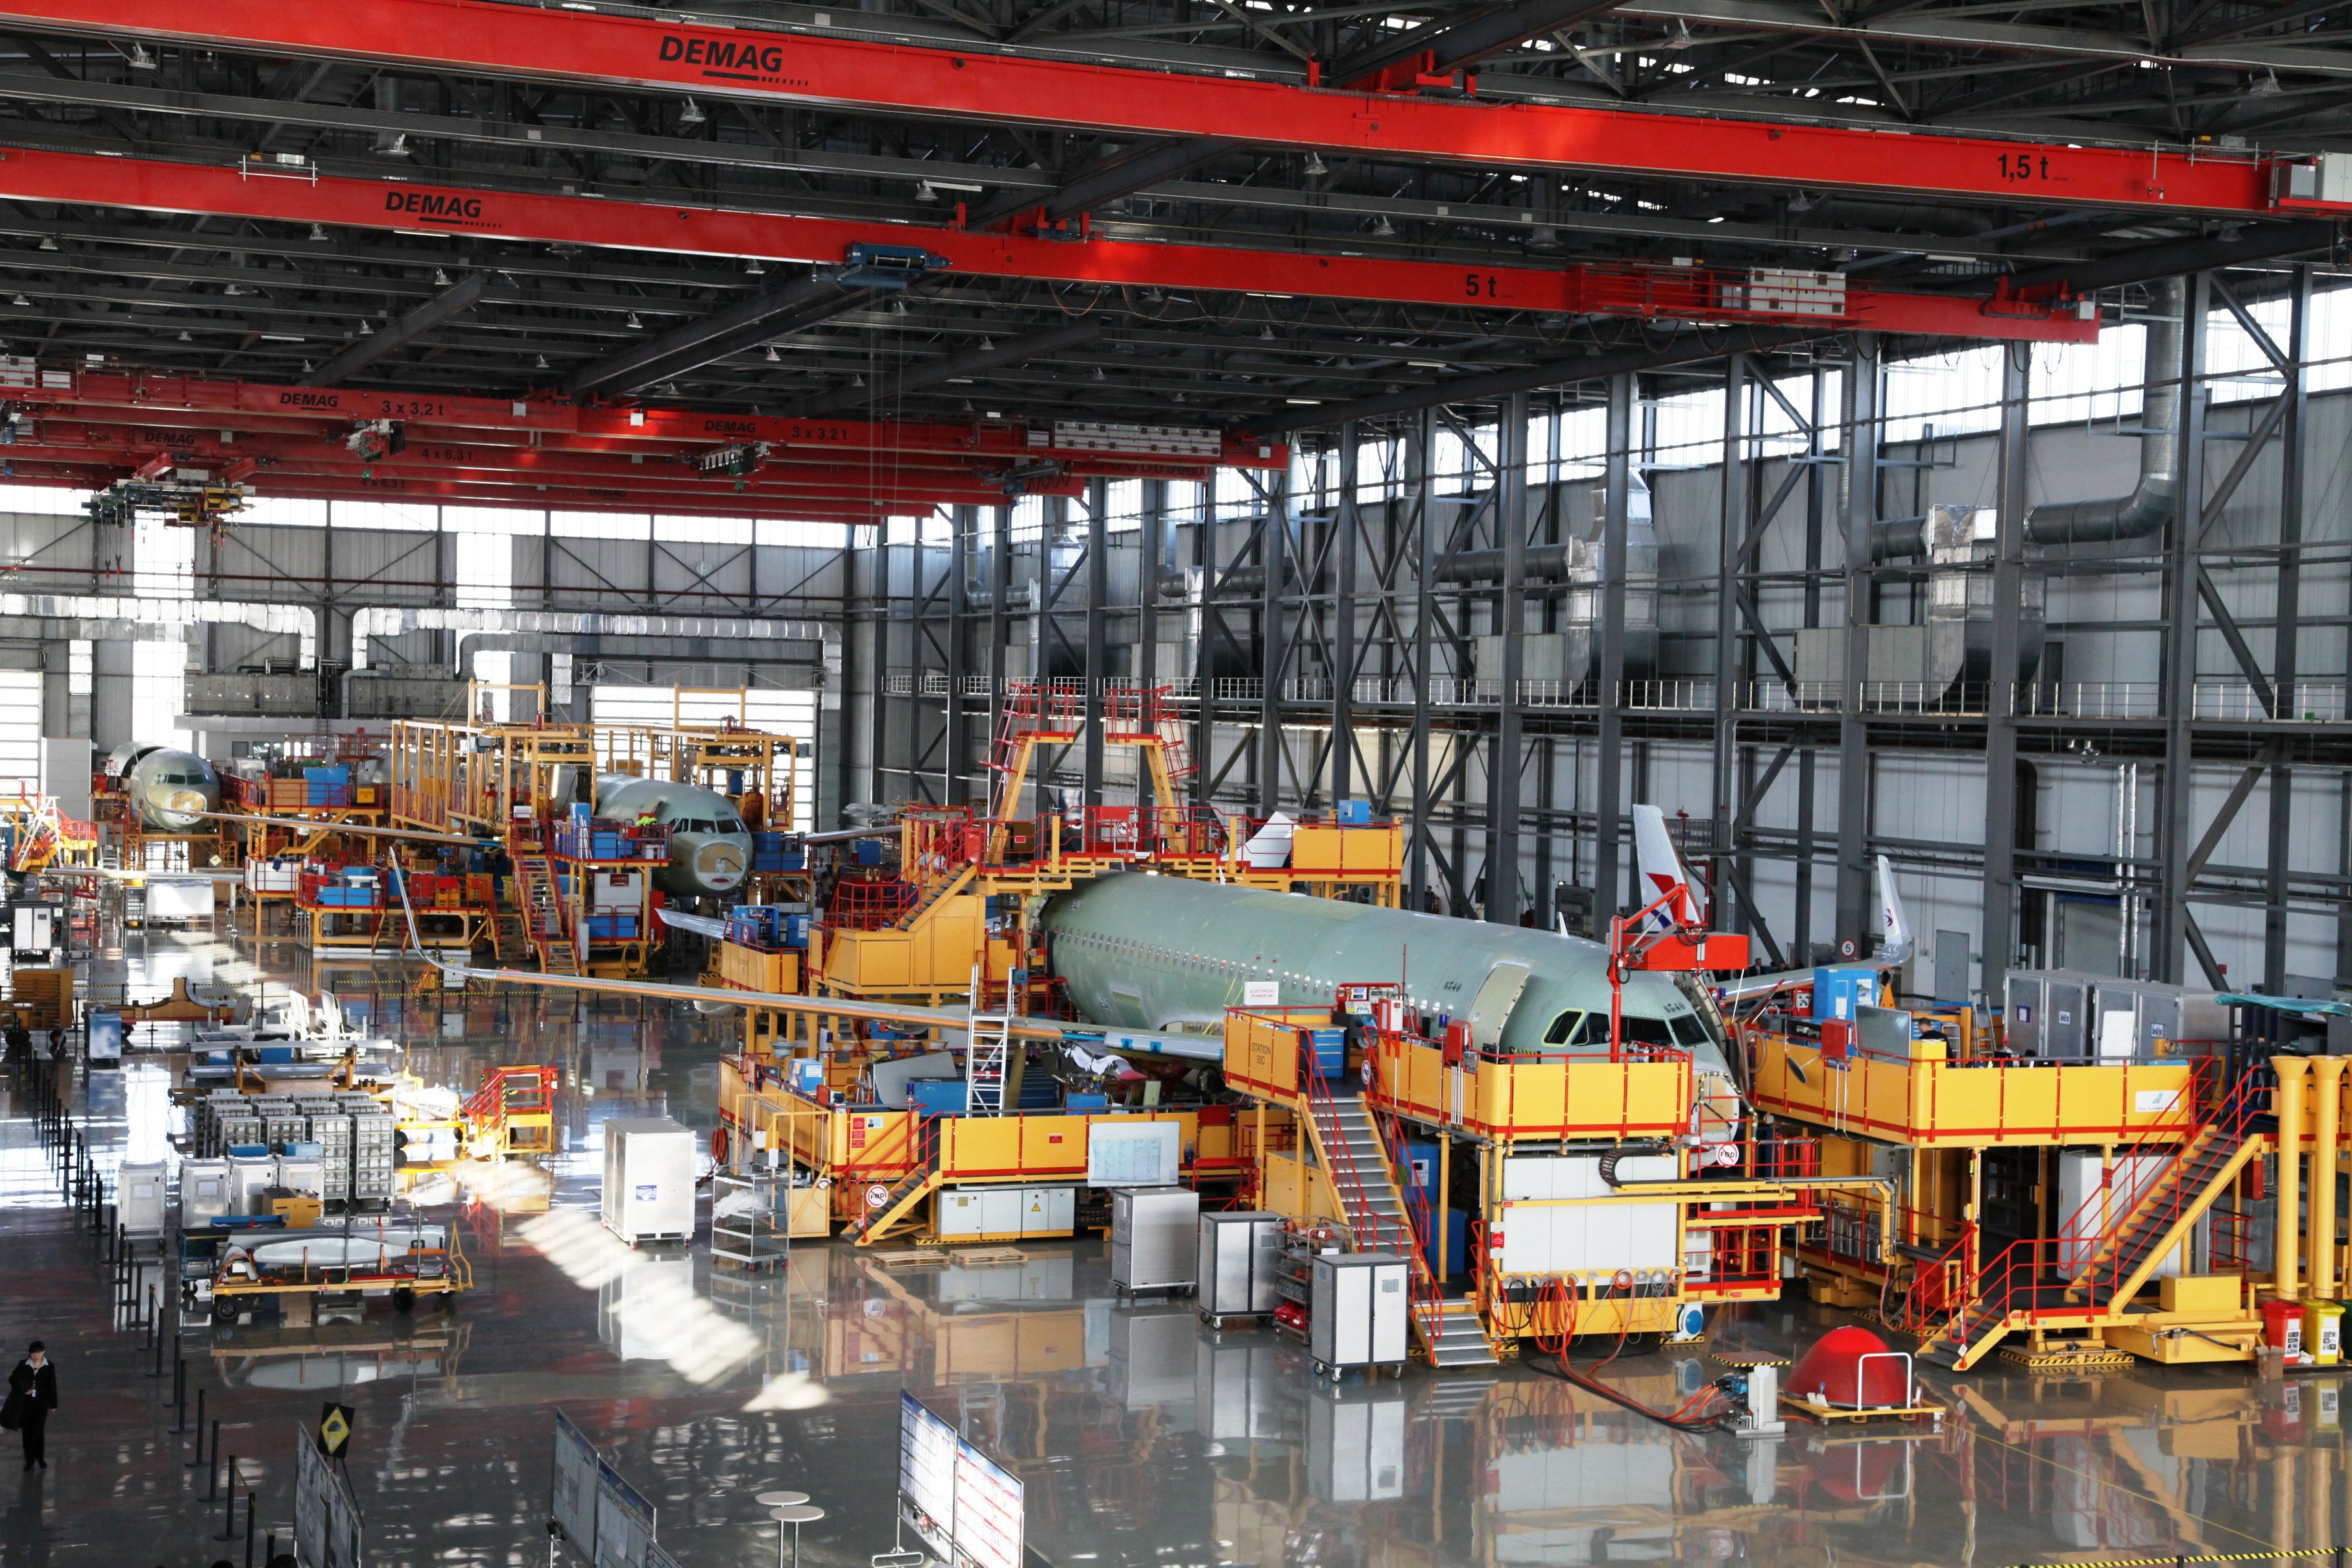 The Airbus SE final assembly line in Tianjin, China.